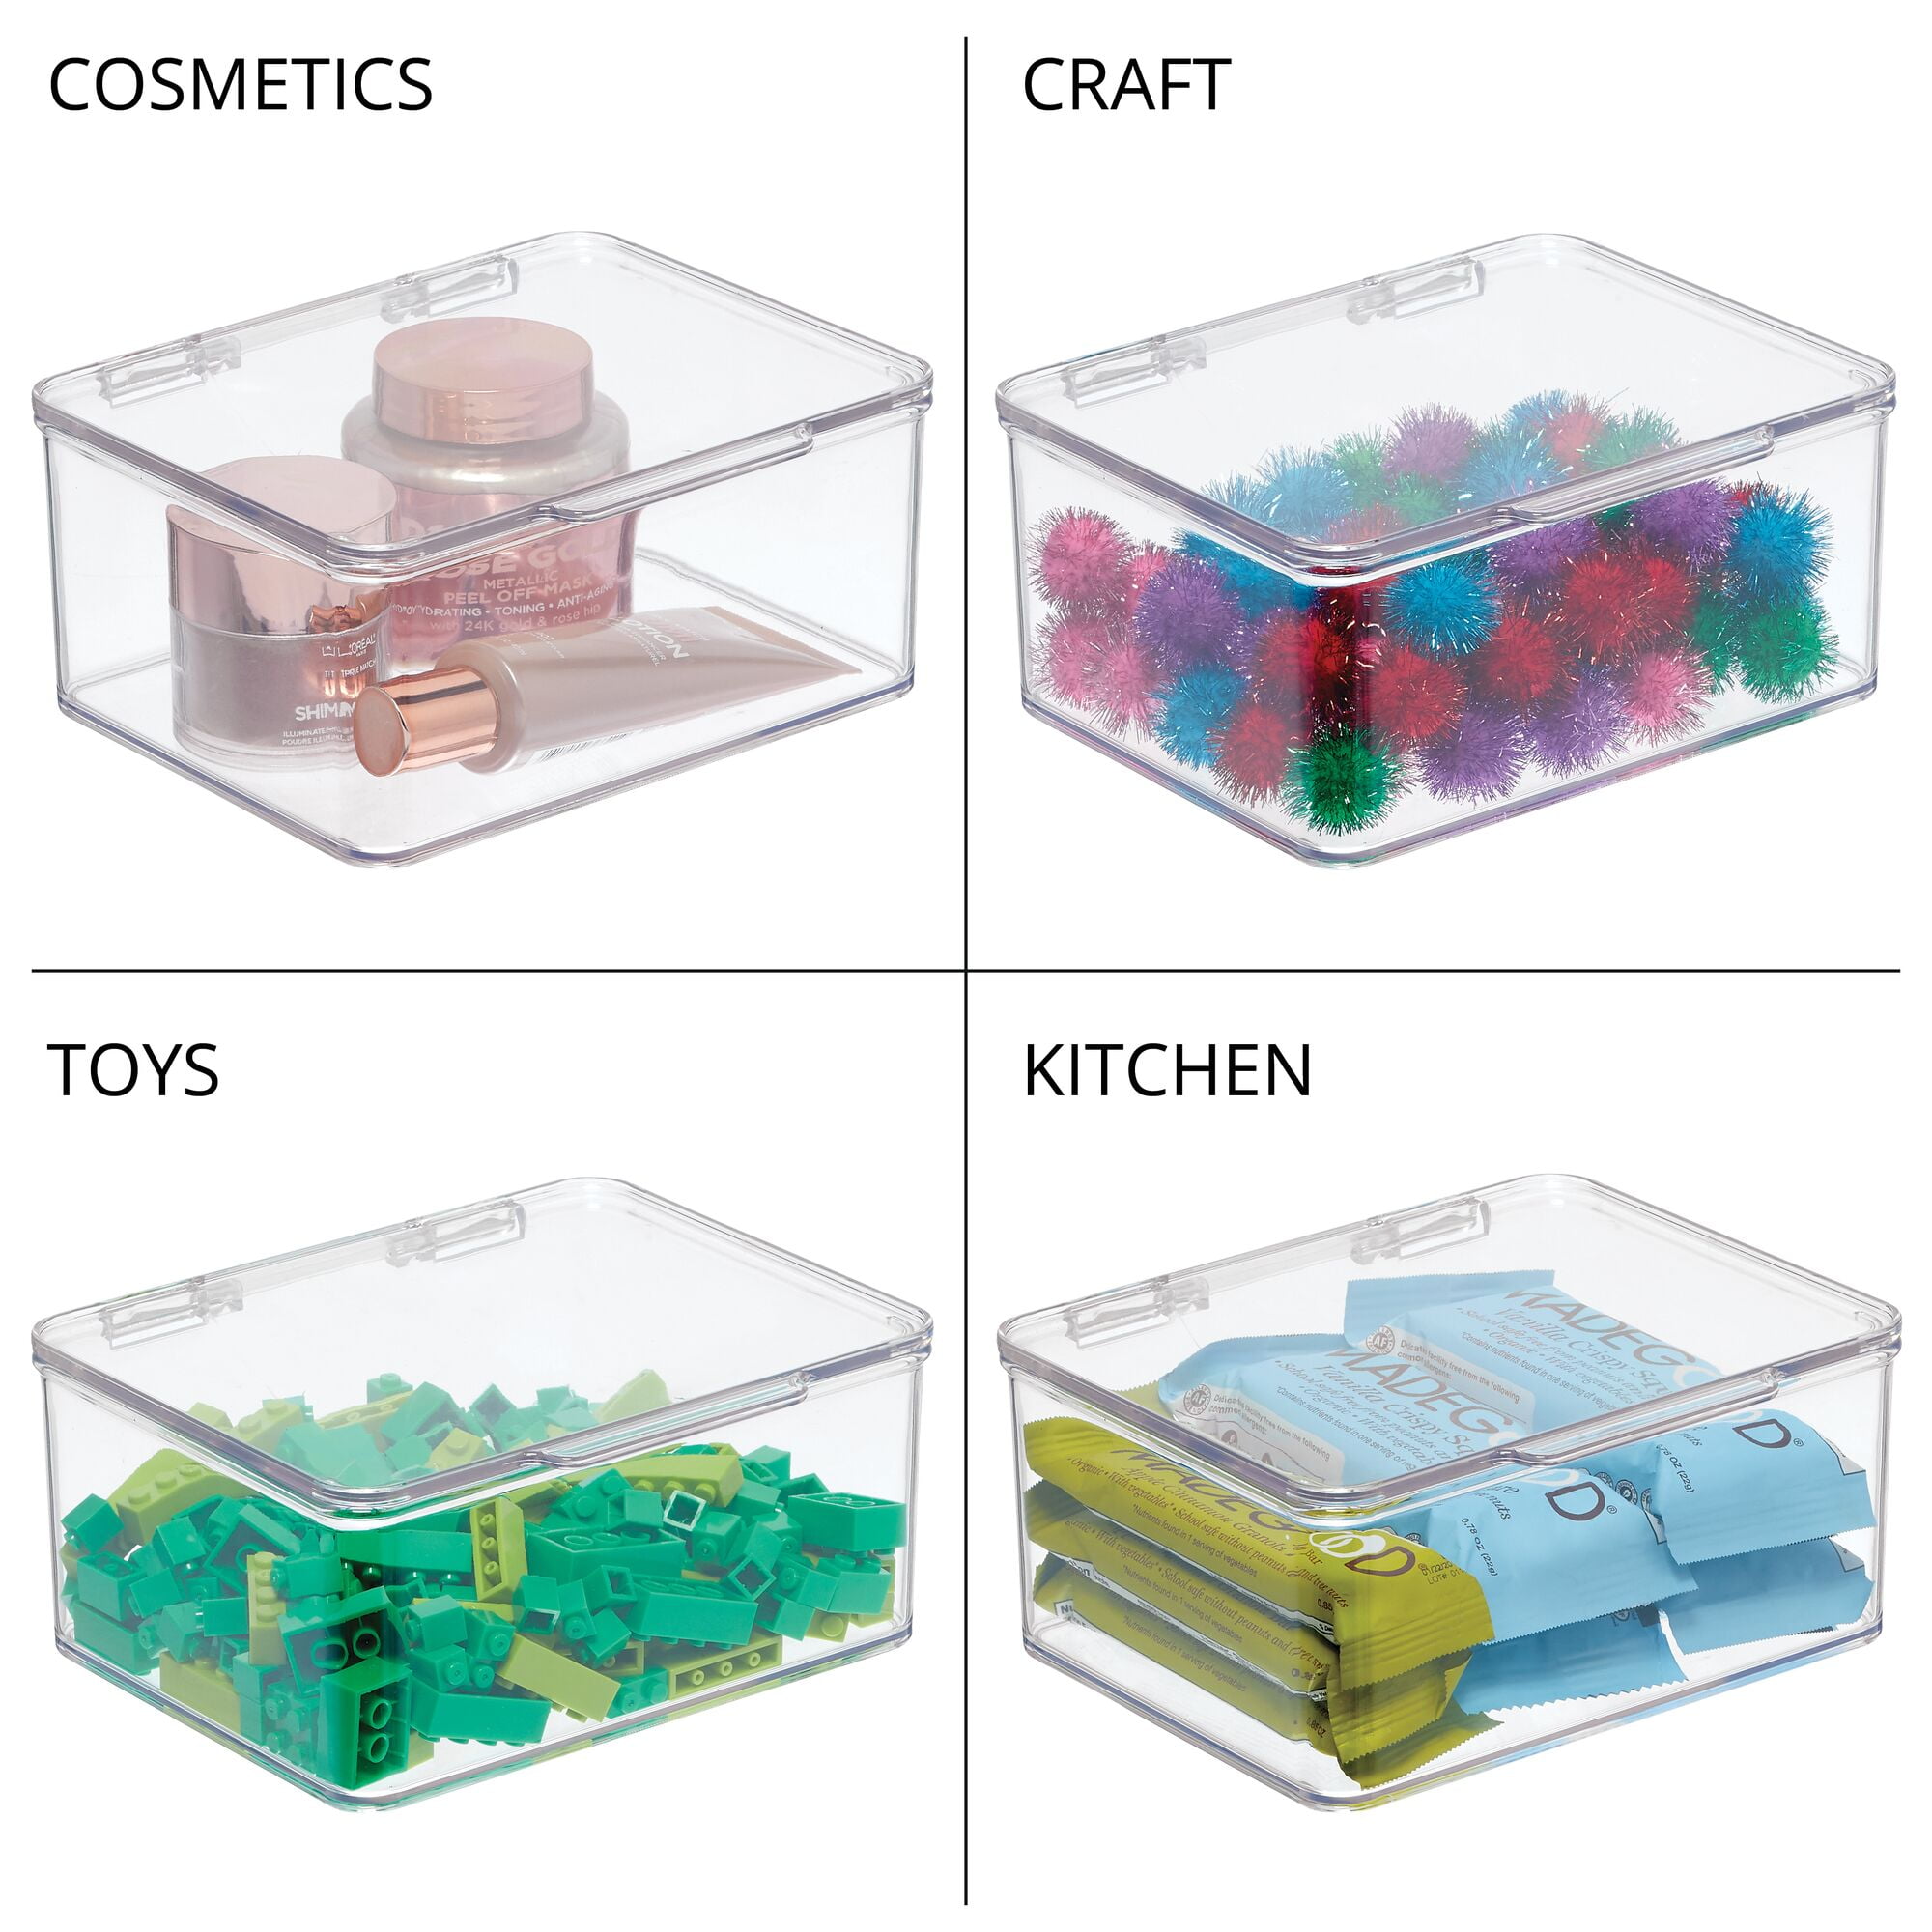 mDesign Plastic Playroom/Gaming Storage Organizer Box Containers, Hinged  Lid for Shelves or Cubby, Holds Small Toys, Building Blocks, Puzzles